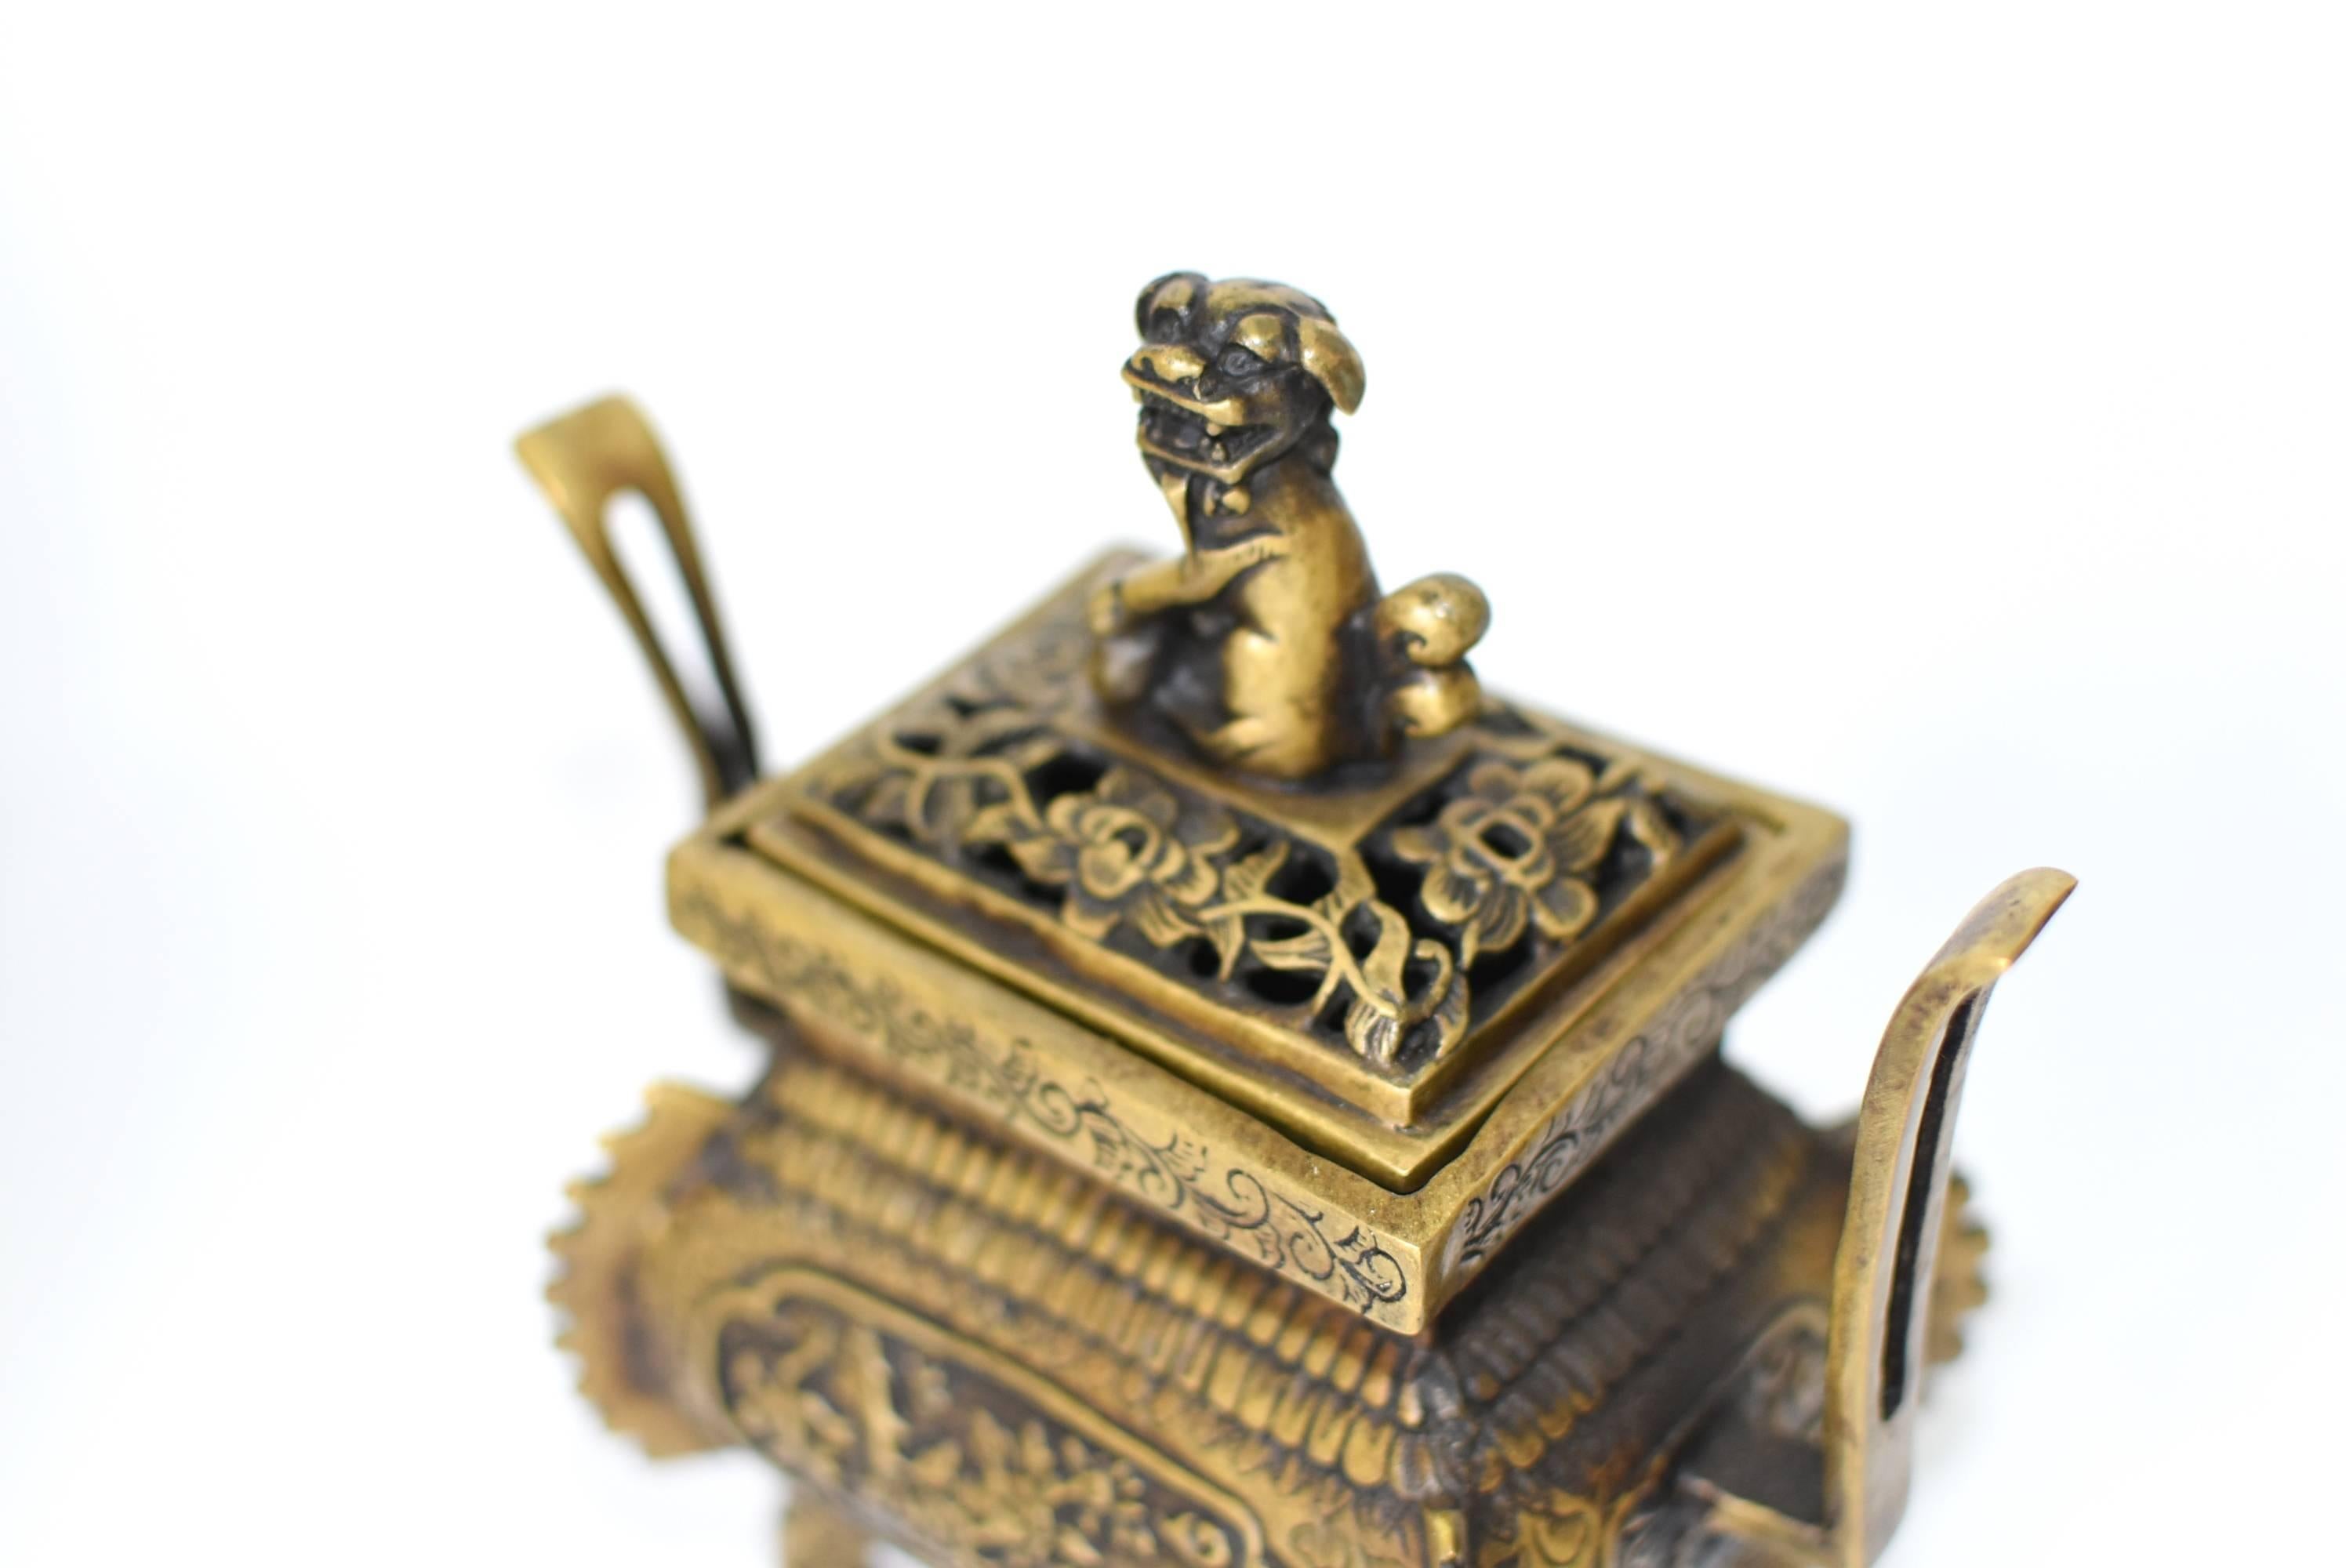 A beautiful, fully decorated incense burner. The burner has curved legs, a bombay style main compartment with an ancient fin pattern. The lid has a floral motif with an adorable foo dog as a finial. Embossed scrolls, flowers and foliage adorn the